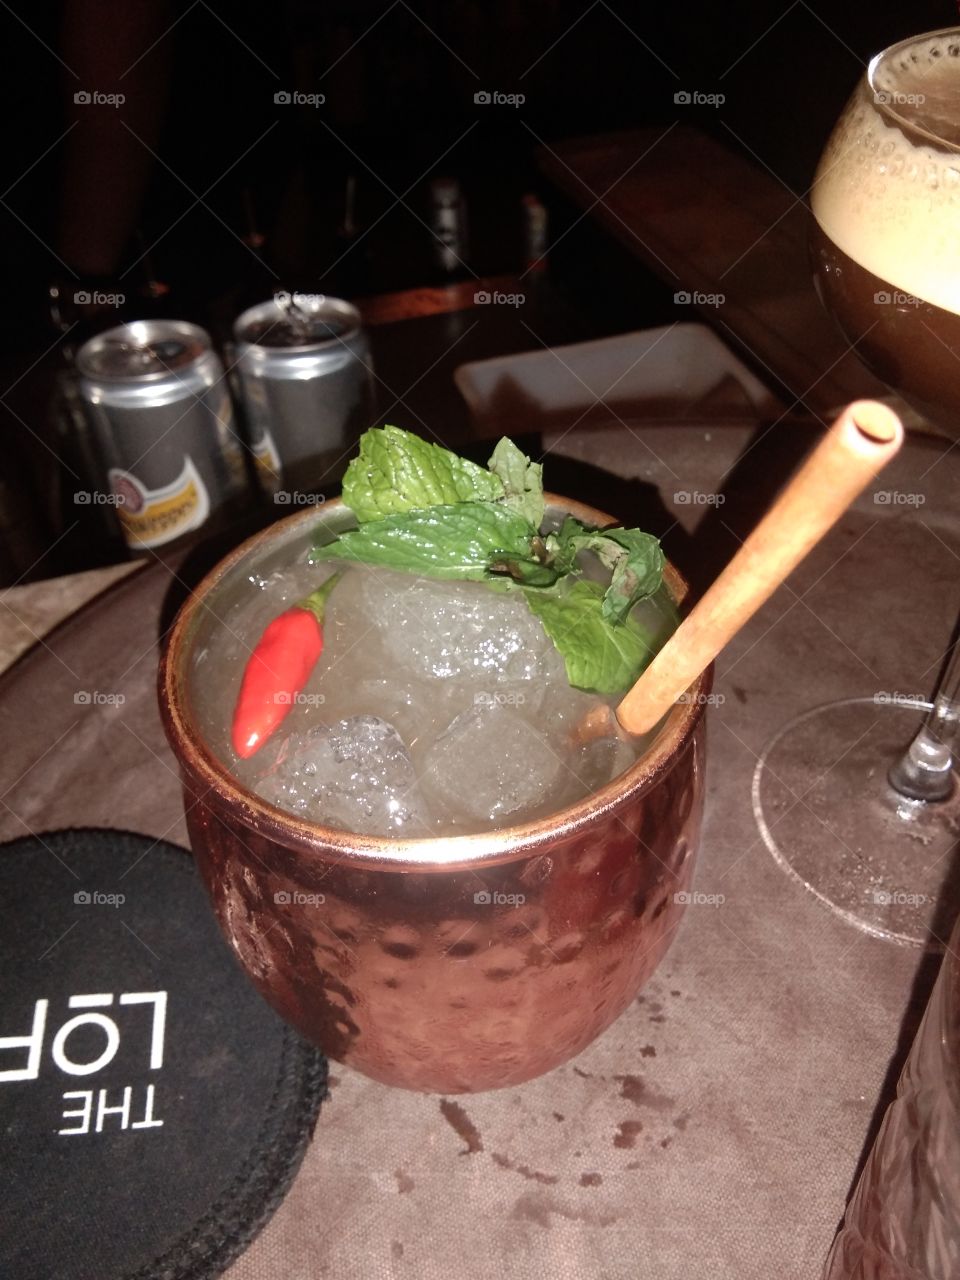 Canggu Mule
vodka with kombucha ginger and lime juice 
mint leaves and chili for garnish